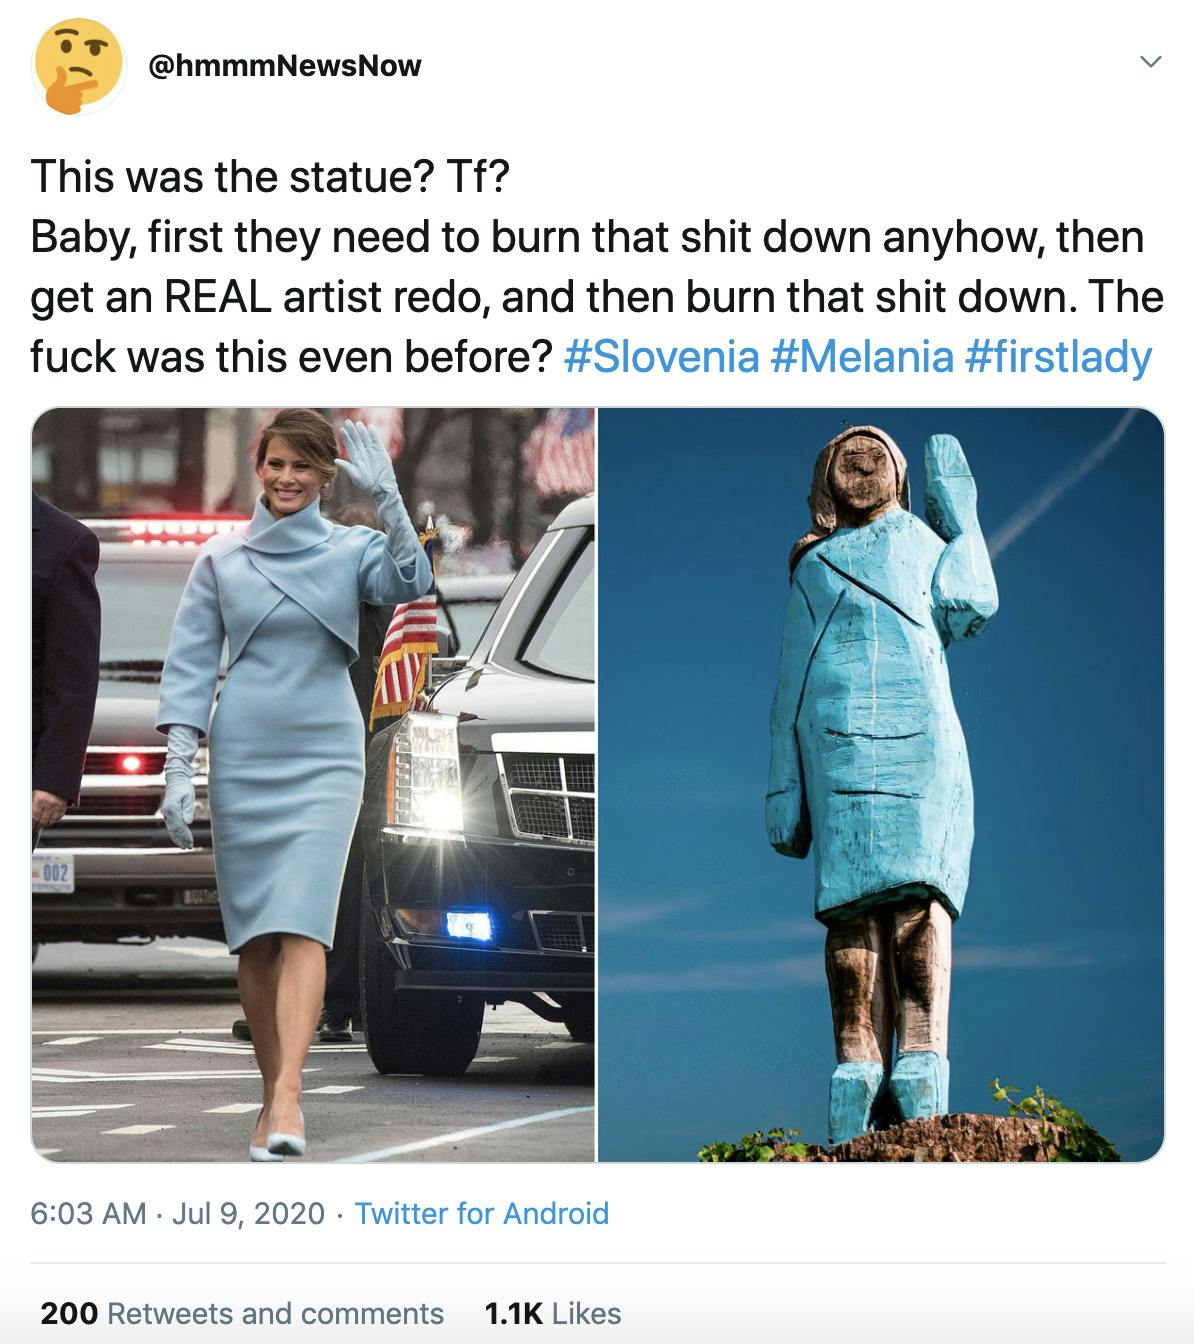 "This was the statue? Tf? Baby, first they need to burn that shit down anyhow, then get an REAL artist redo, and then burn that shit down. The fuck was this even before? #Slovenia #Melania #firstlady" image of Melania next to the statue